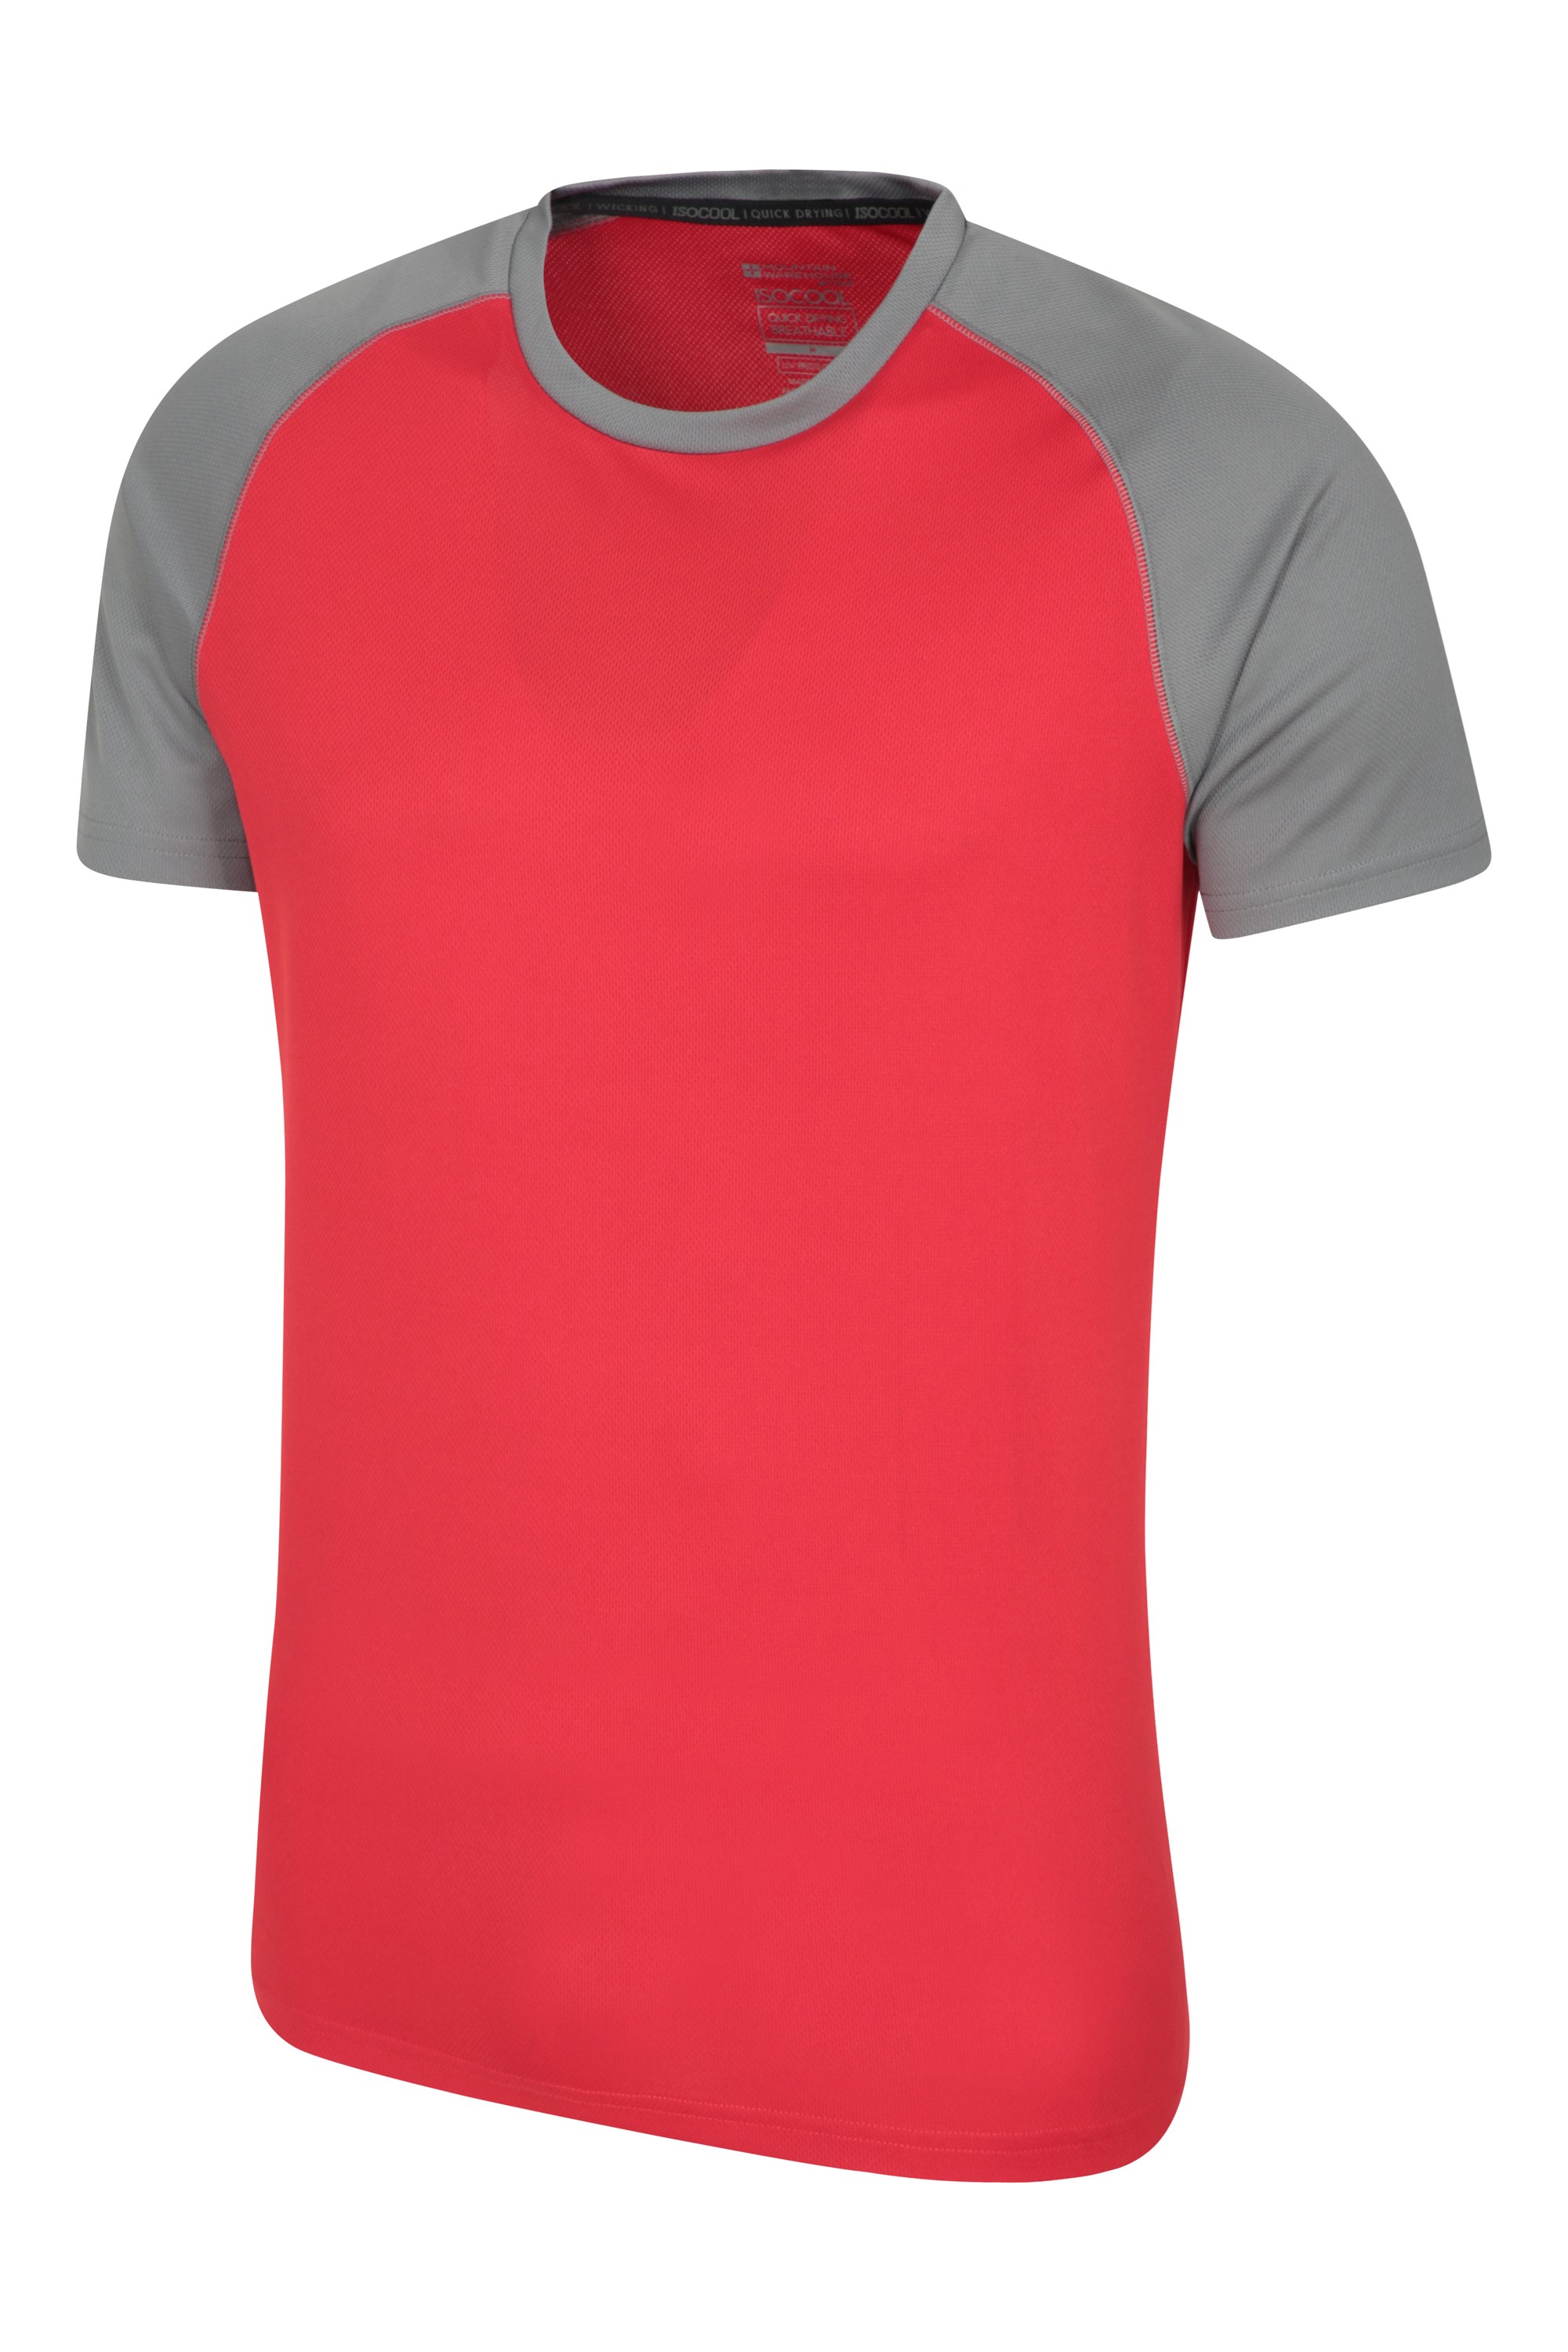 Sports Lightweight T-Shirt Outdoors Warm Tee Shirt Cosy Mountain Warehouse Cosmo Mens IsoCool Tee UV Sweat Wicking Top for Gym